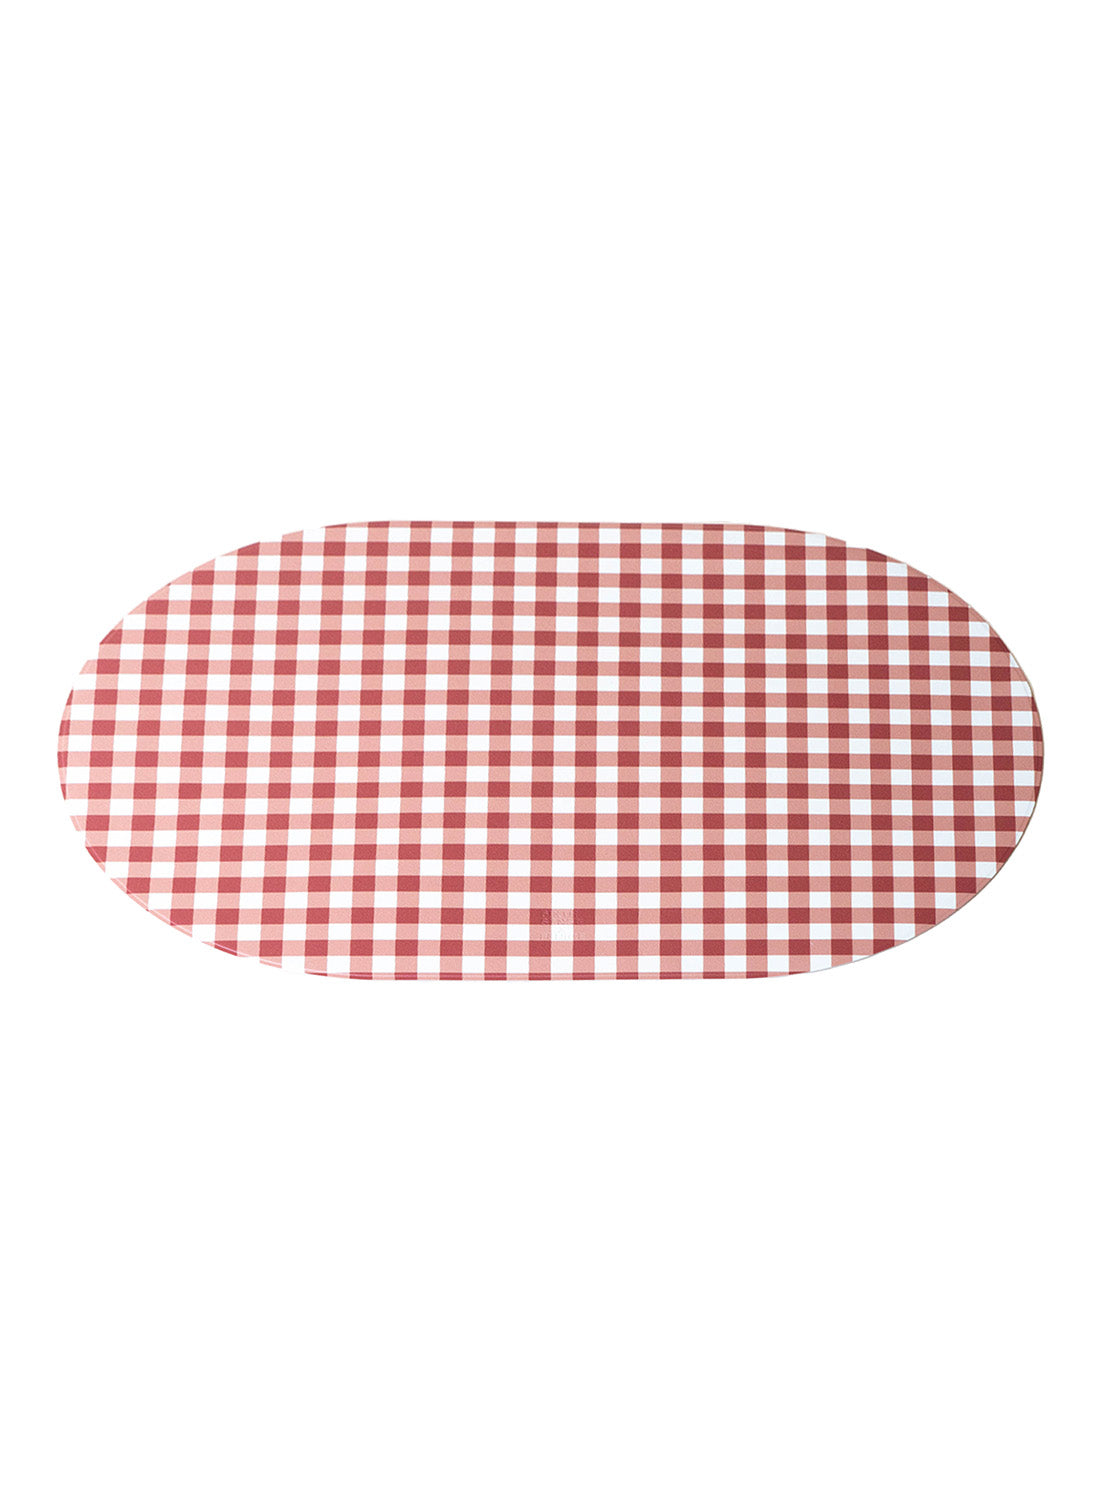 Fenice Gingham Placemat, Brown